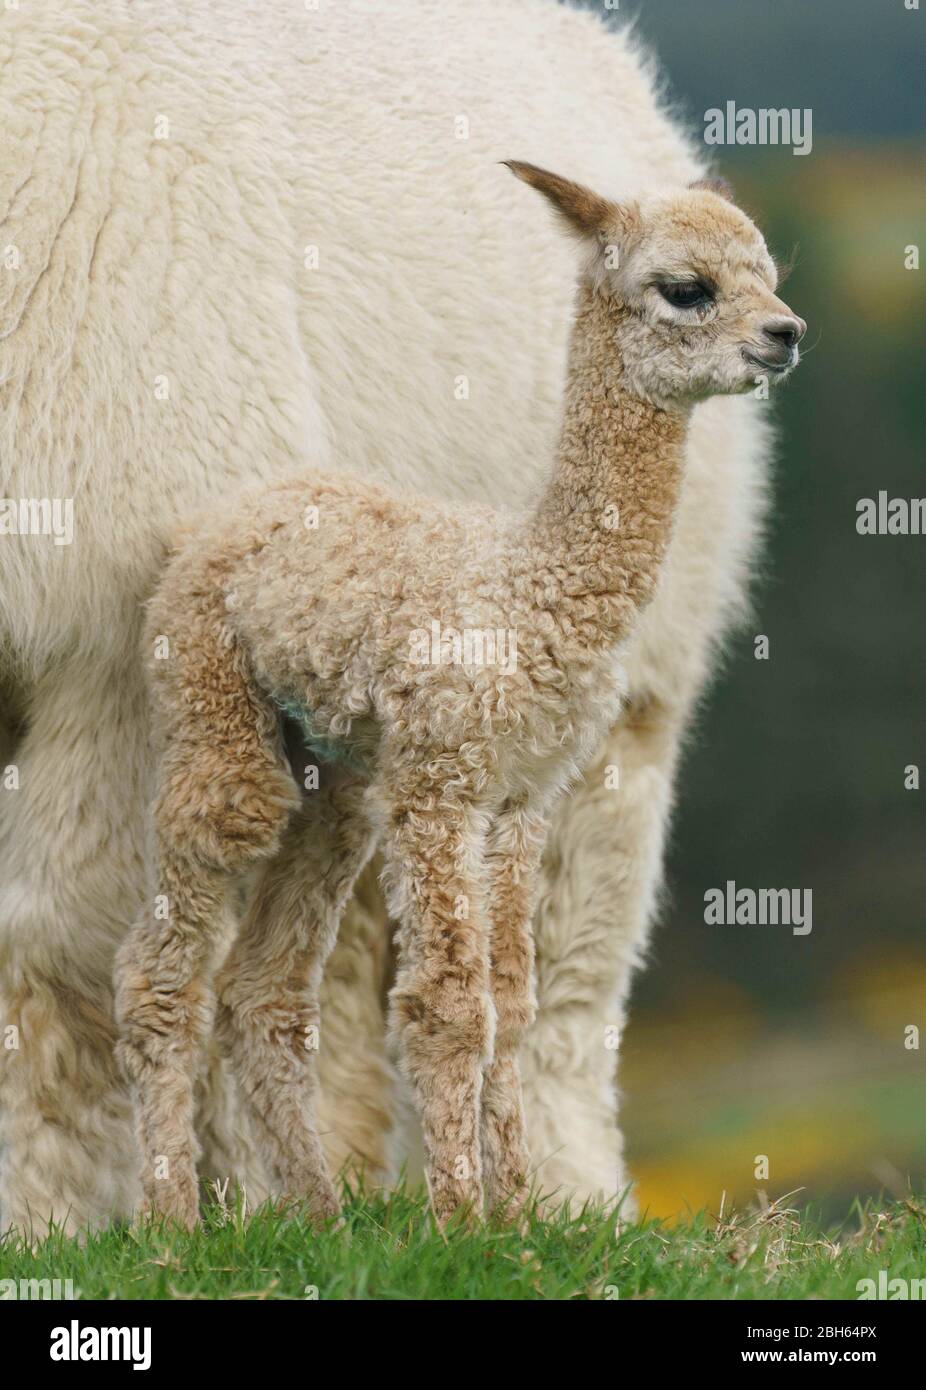 County Wicklow, Ireland. 23rd Apr 2020. A two day old Alpaca (known as a cria), stays close to his mum on Joe Phelan’s K2 Alpaca farm in County Wicklow, Ireland. Molecules in Alpaca’s blood may serve as useful therapeutics during Covid-19 according to researchers from the Vlaams Institute for Biotechnology in Ghent. Antibodies found within camelids blood (camels, llamas and alpacas) were first used in HIV research, and have proved effective against viruses such as MERS and SARS. Credit: fran veale/Alamy Live News Stock Photo